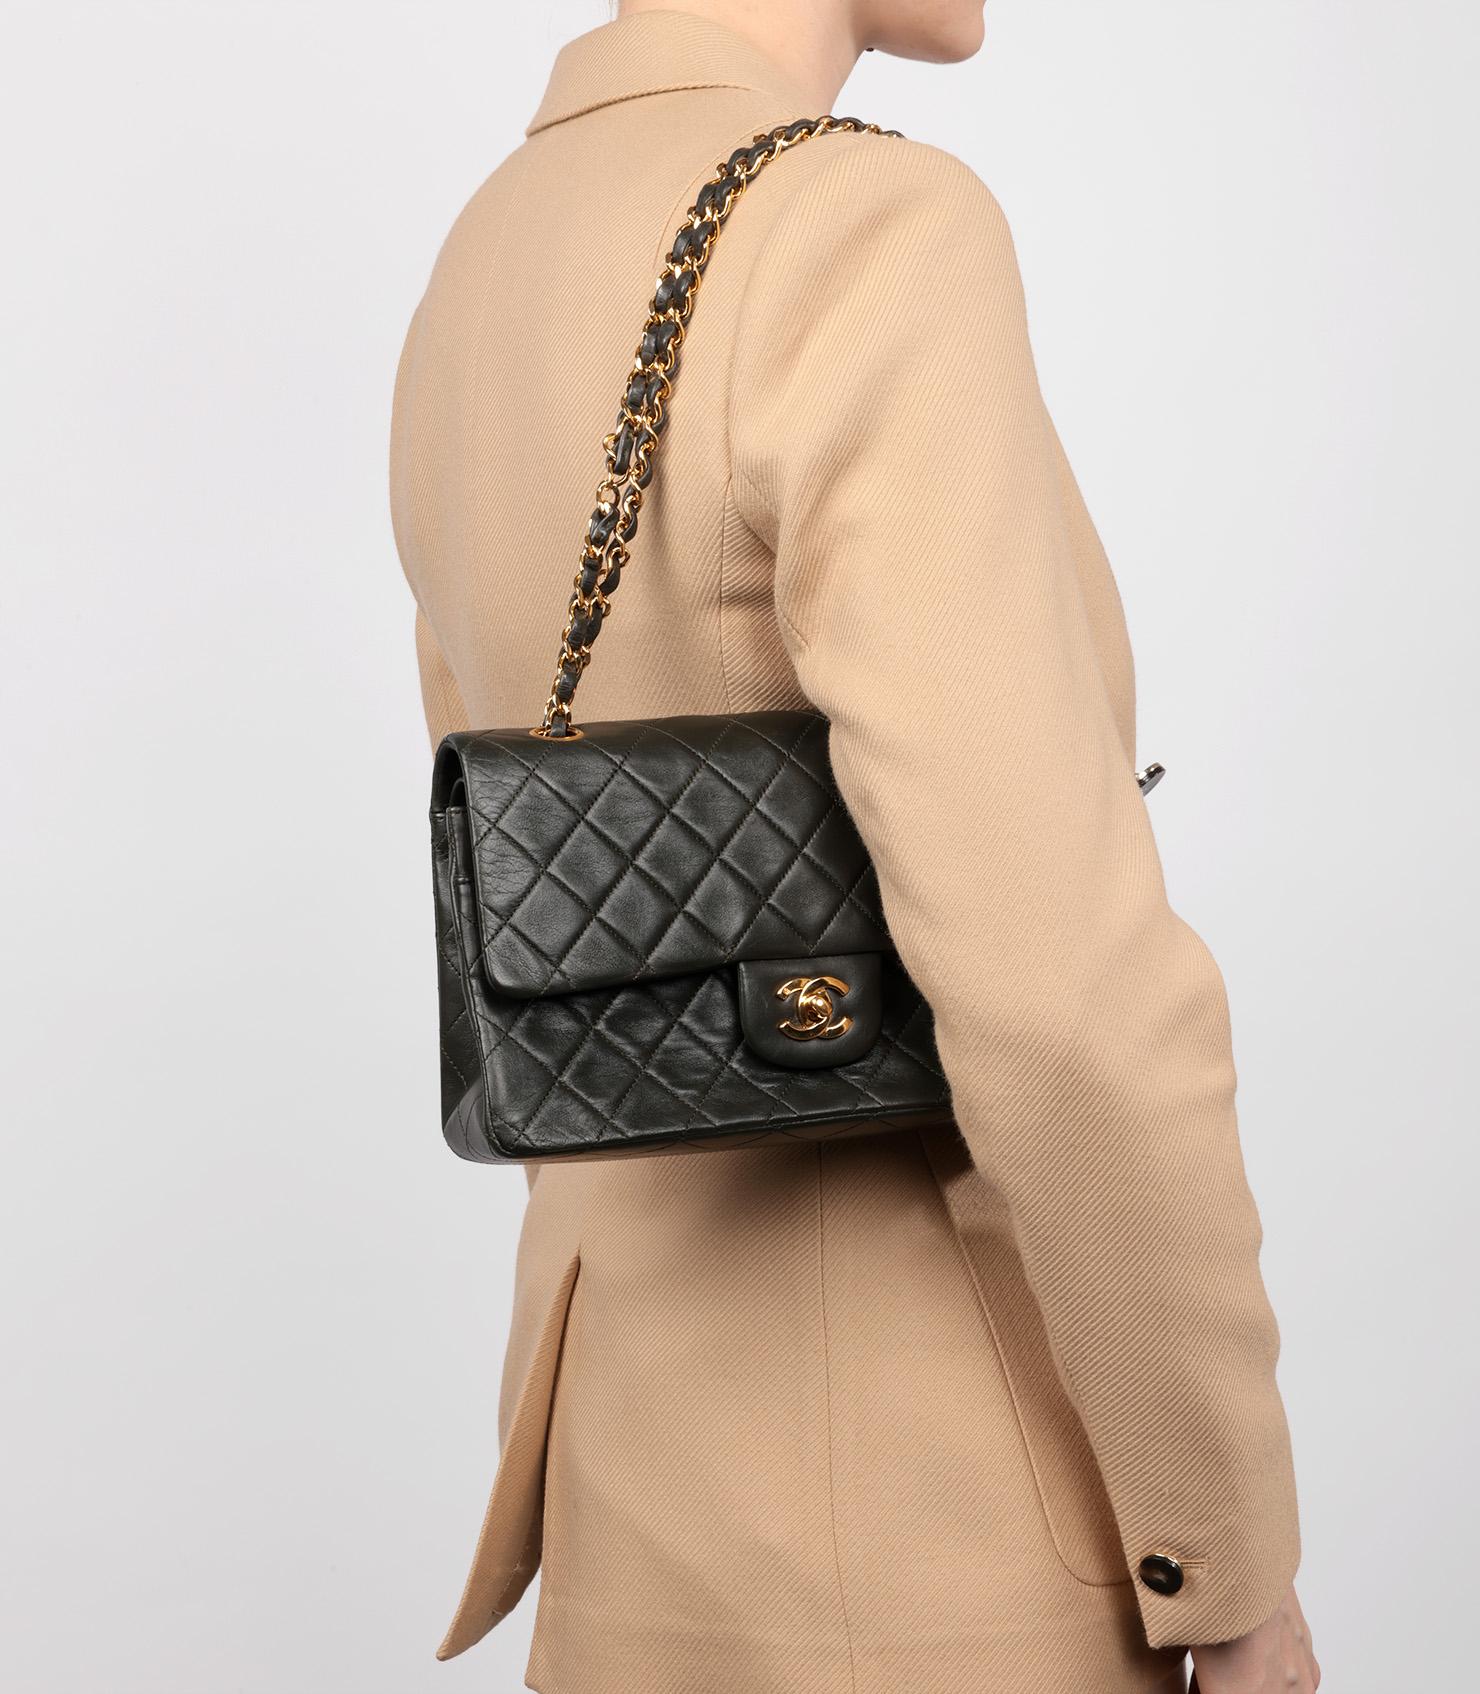 Chanel Khaki Quilted Lambskin Vintage Medium Classic Double Flap Bag

Brand- Chanel
Model- Medium Classic Double Flap Bag
Product Type- Shoulder
Serial Number- 16*****
Age- Circa 1989
Accompanied By- Chanel Dust Bag, Authenticity Card
Colour-